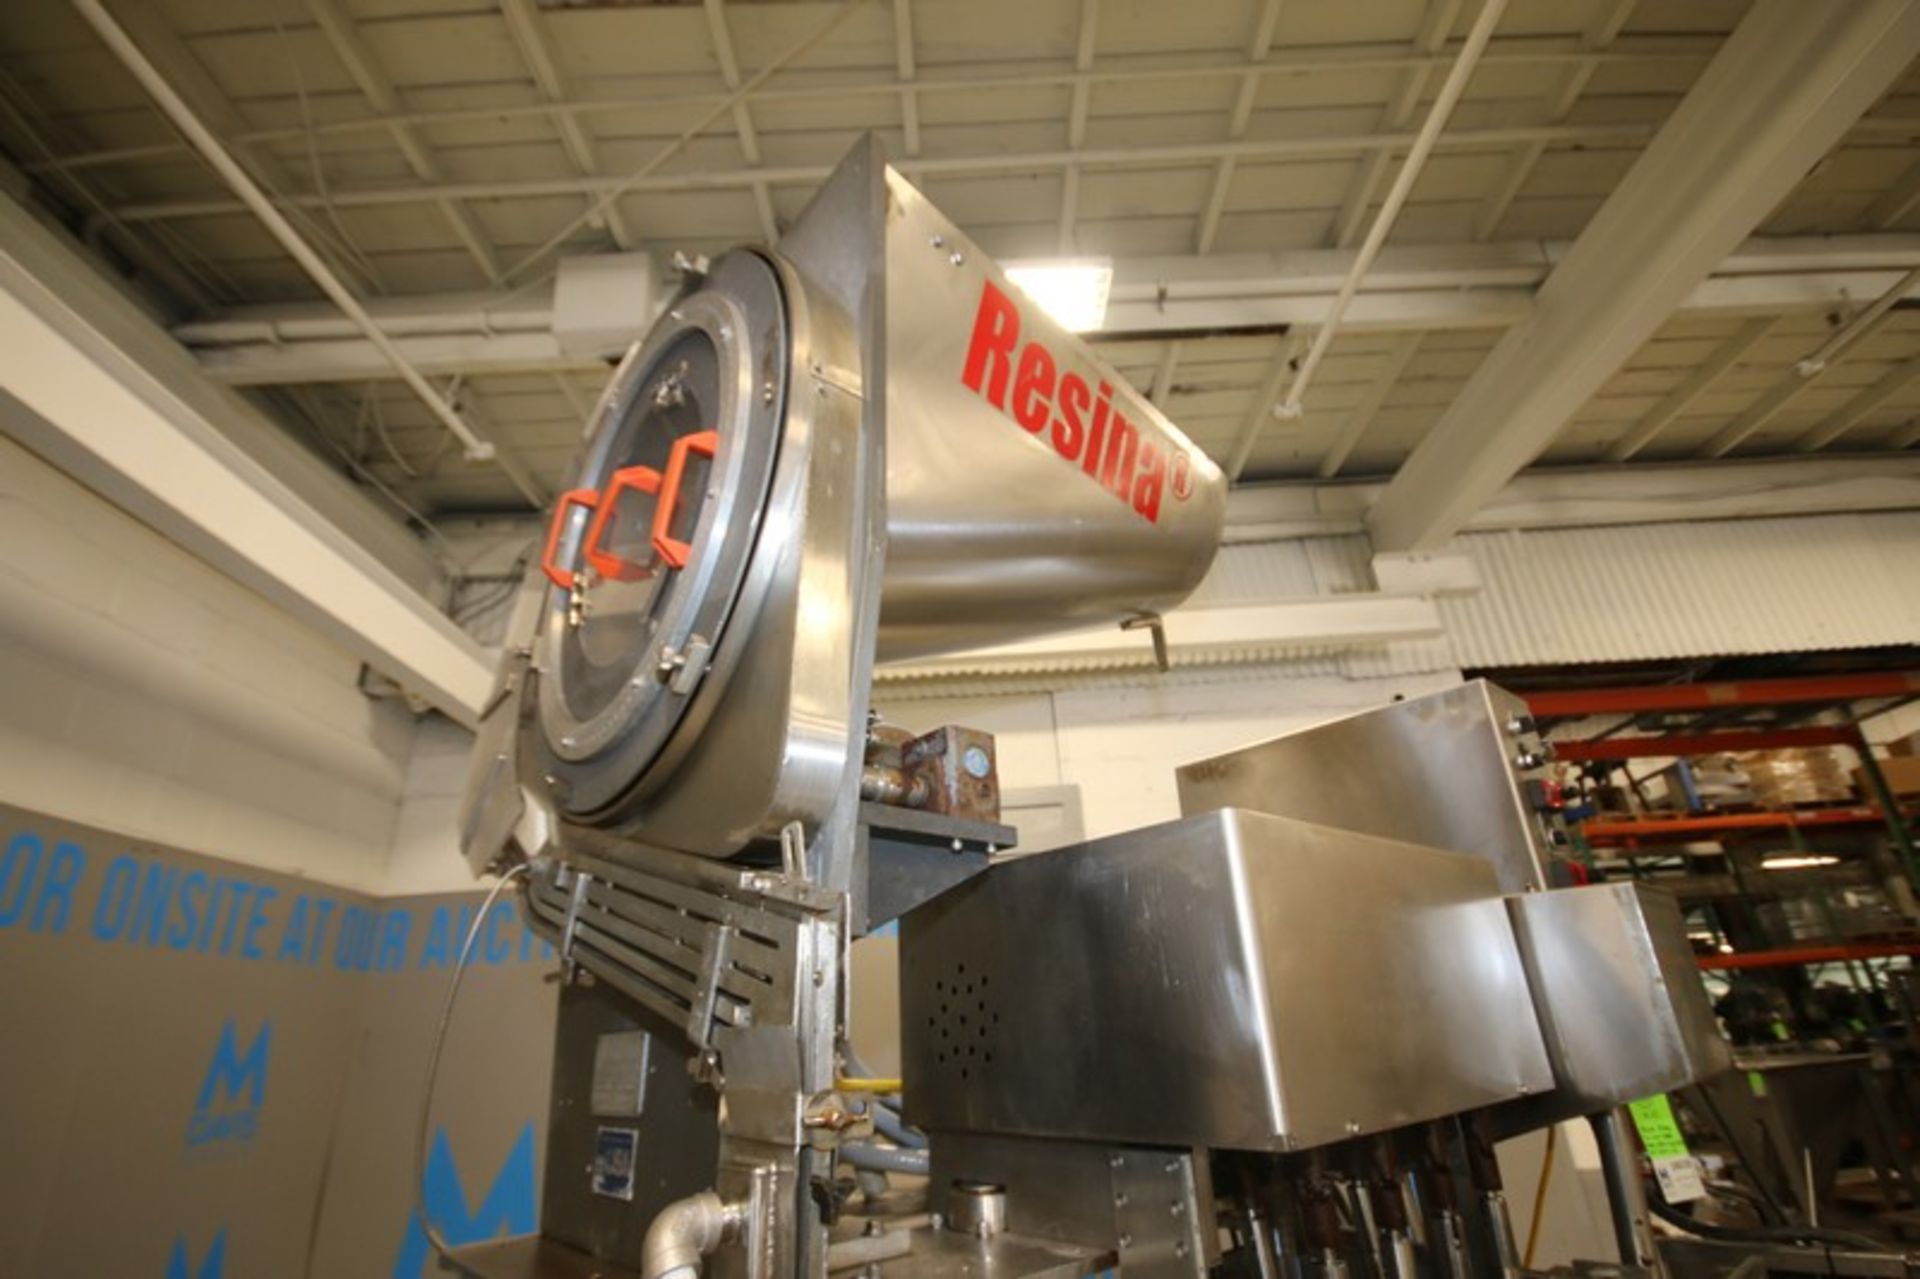 Resina 8 - Head In-LIne S/S Capper, Model NRK-400-HFST, SN 11004-03, with 4.5" W conveyor, On- - Image 5 of 14